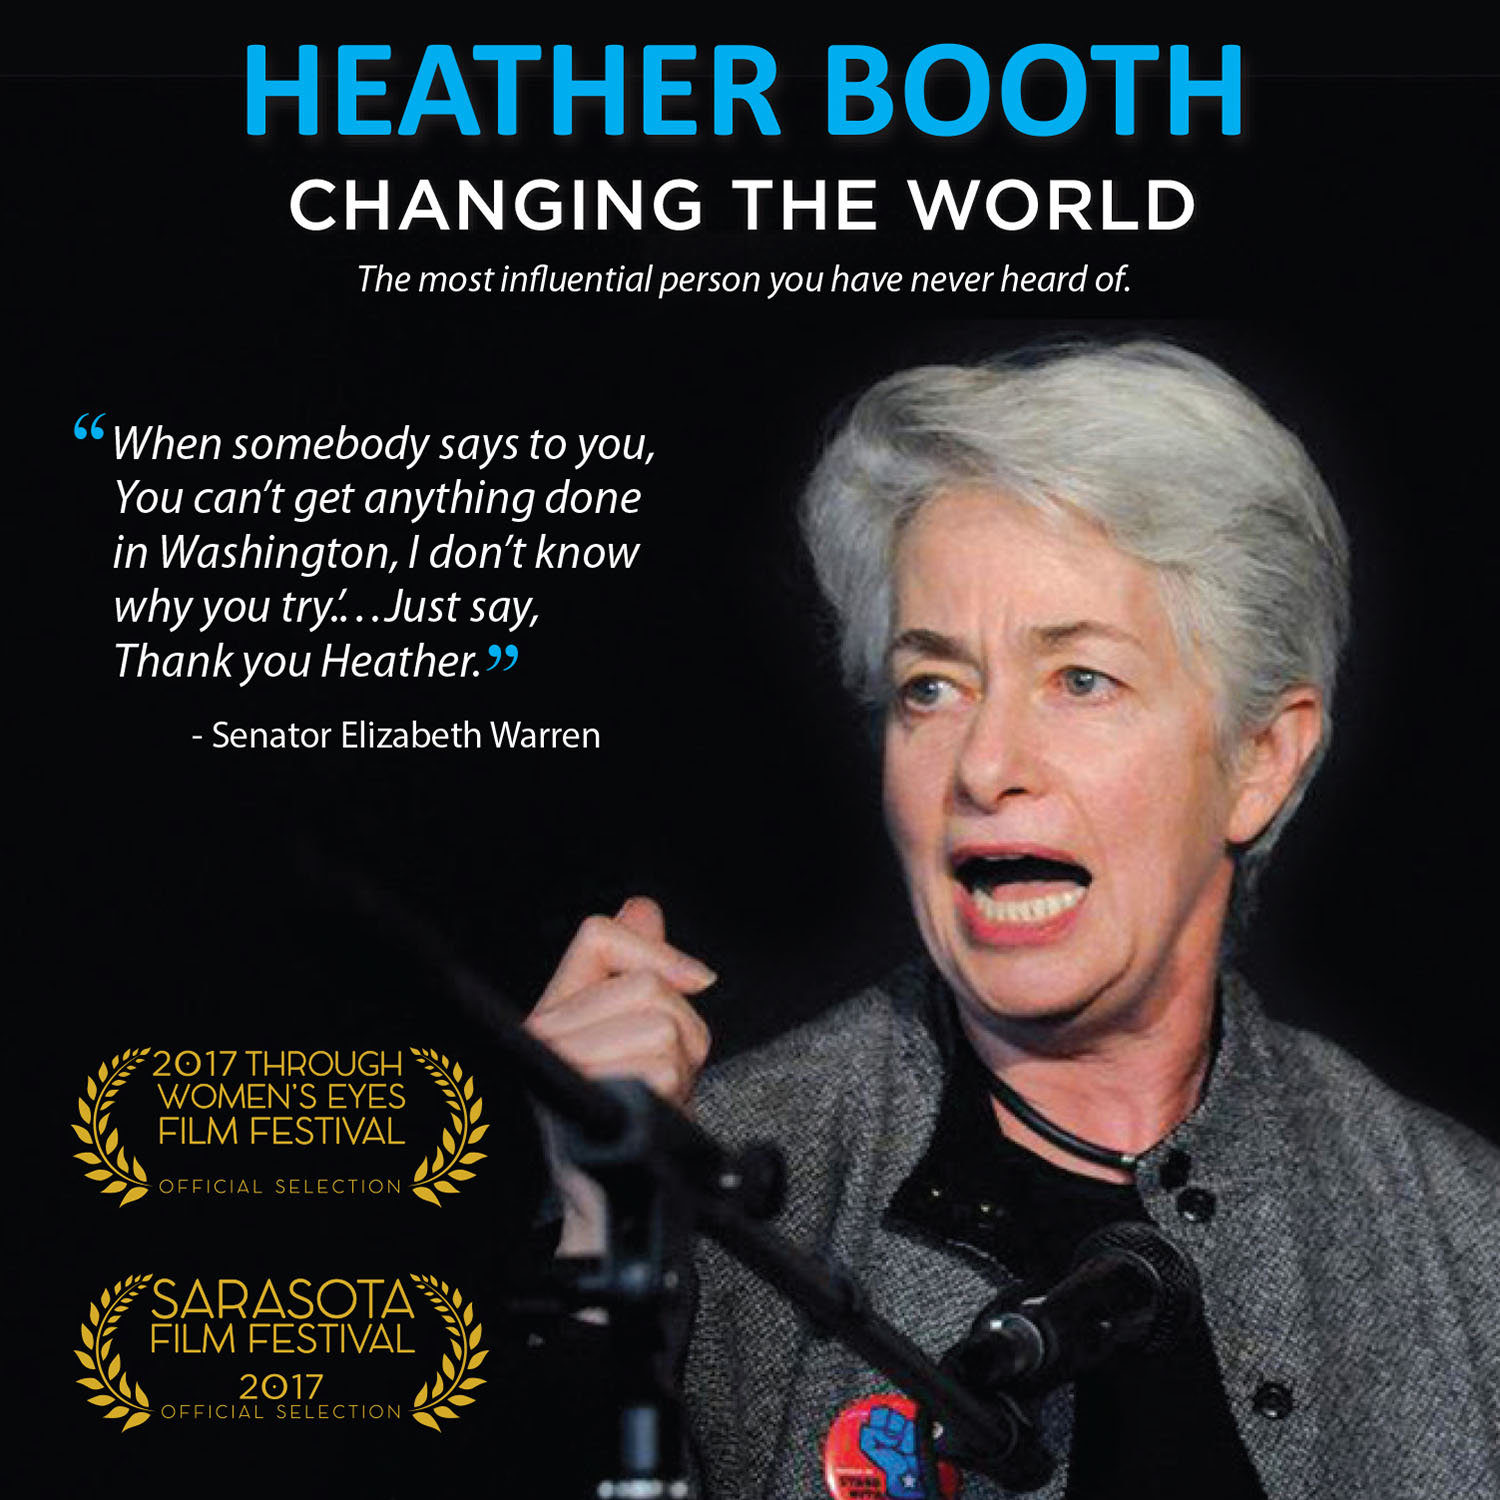 Heather Booth: Changing the World